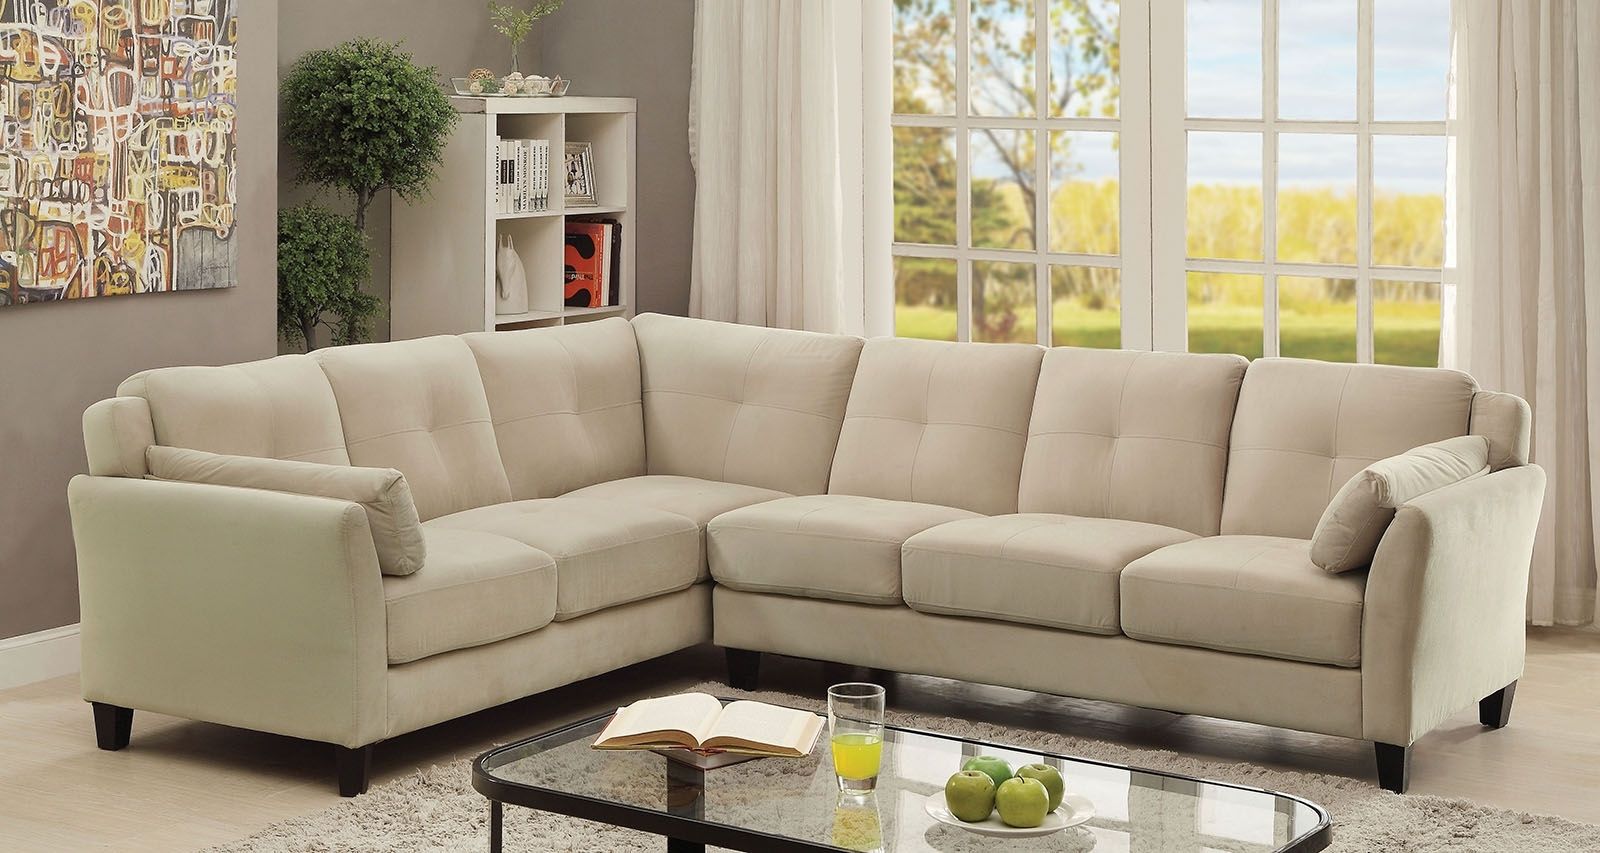 Peever Ii Beige Sectional | Andrew's Furniture And Mattress With Beige Sectional Sofas (View 3 of 15)